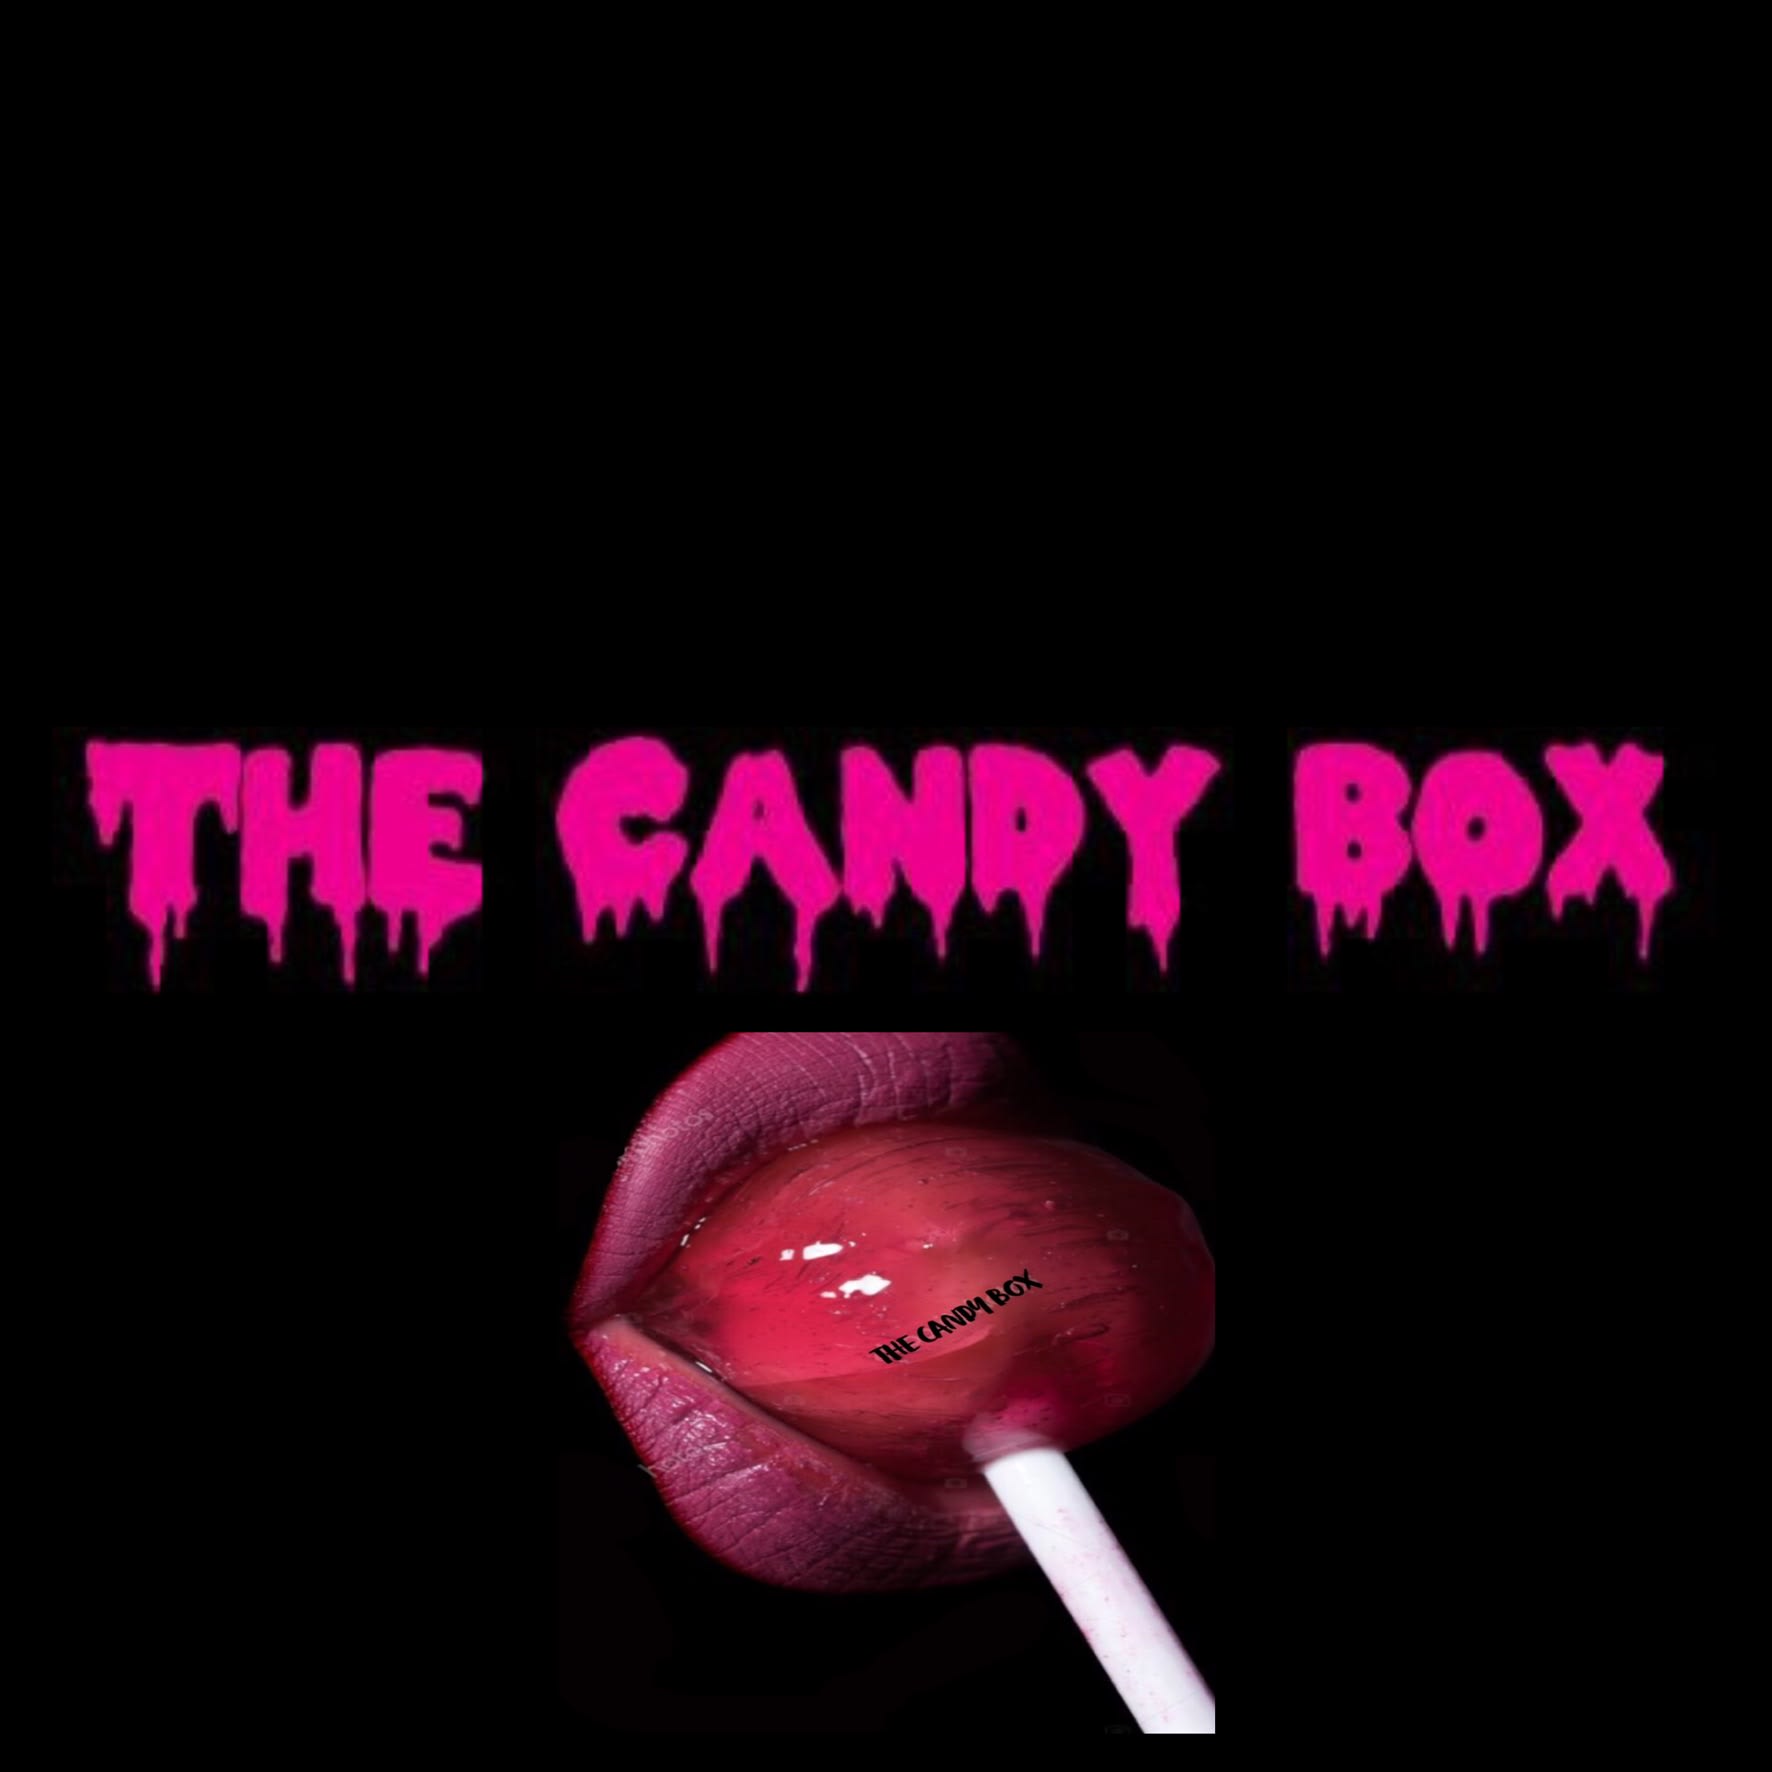 The Candy Box